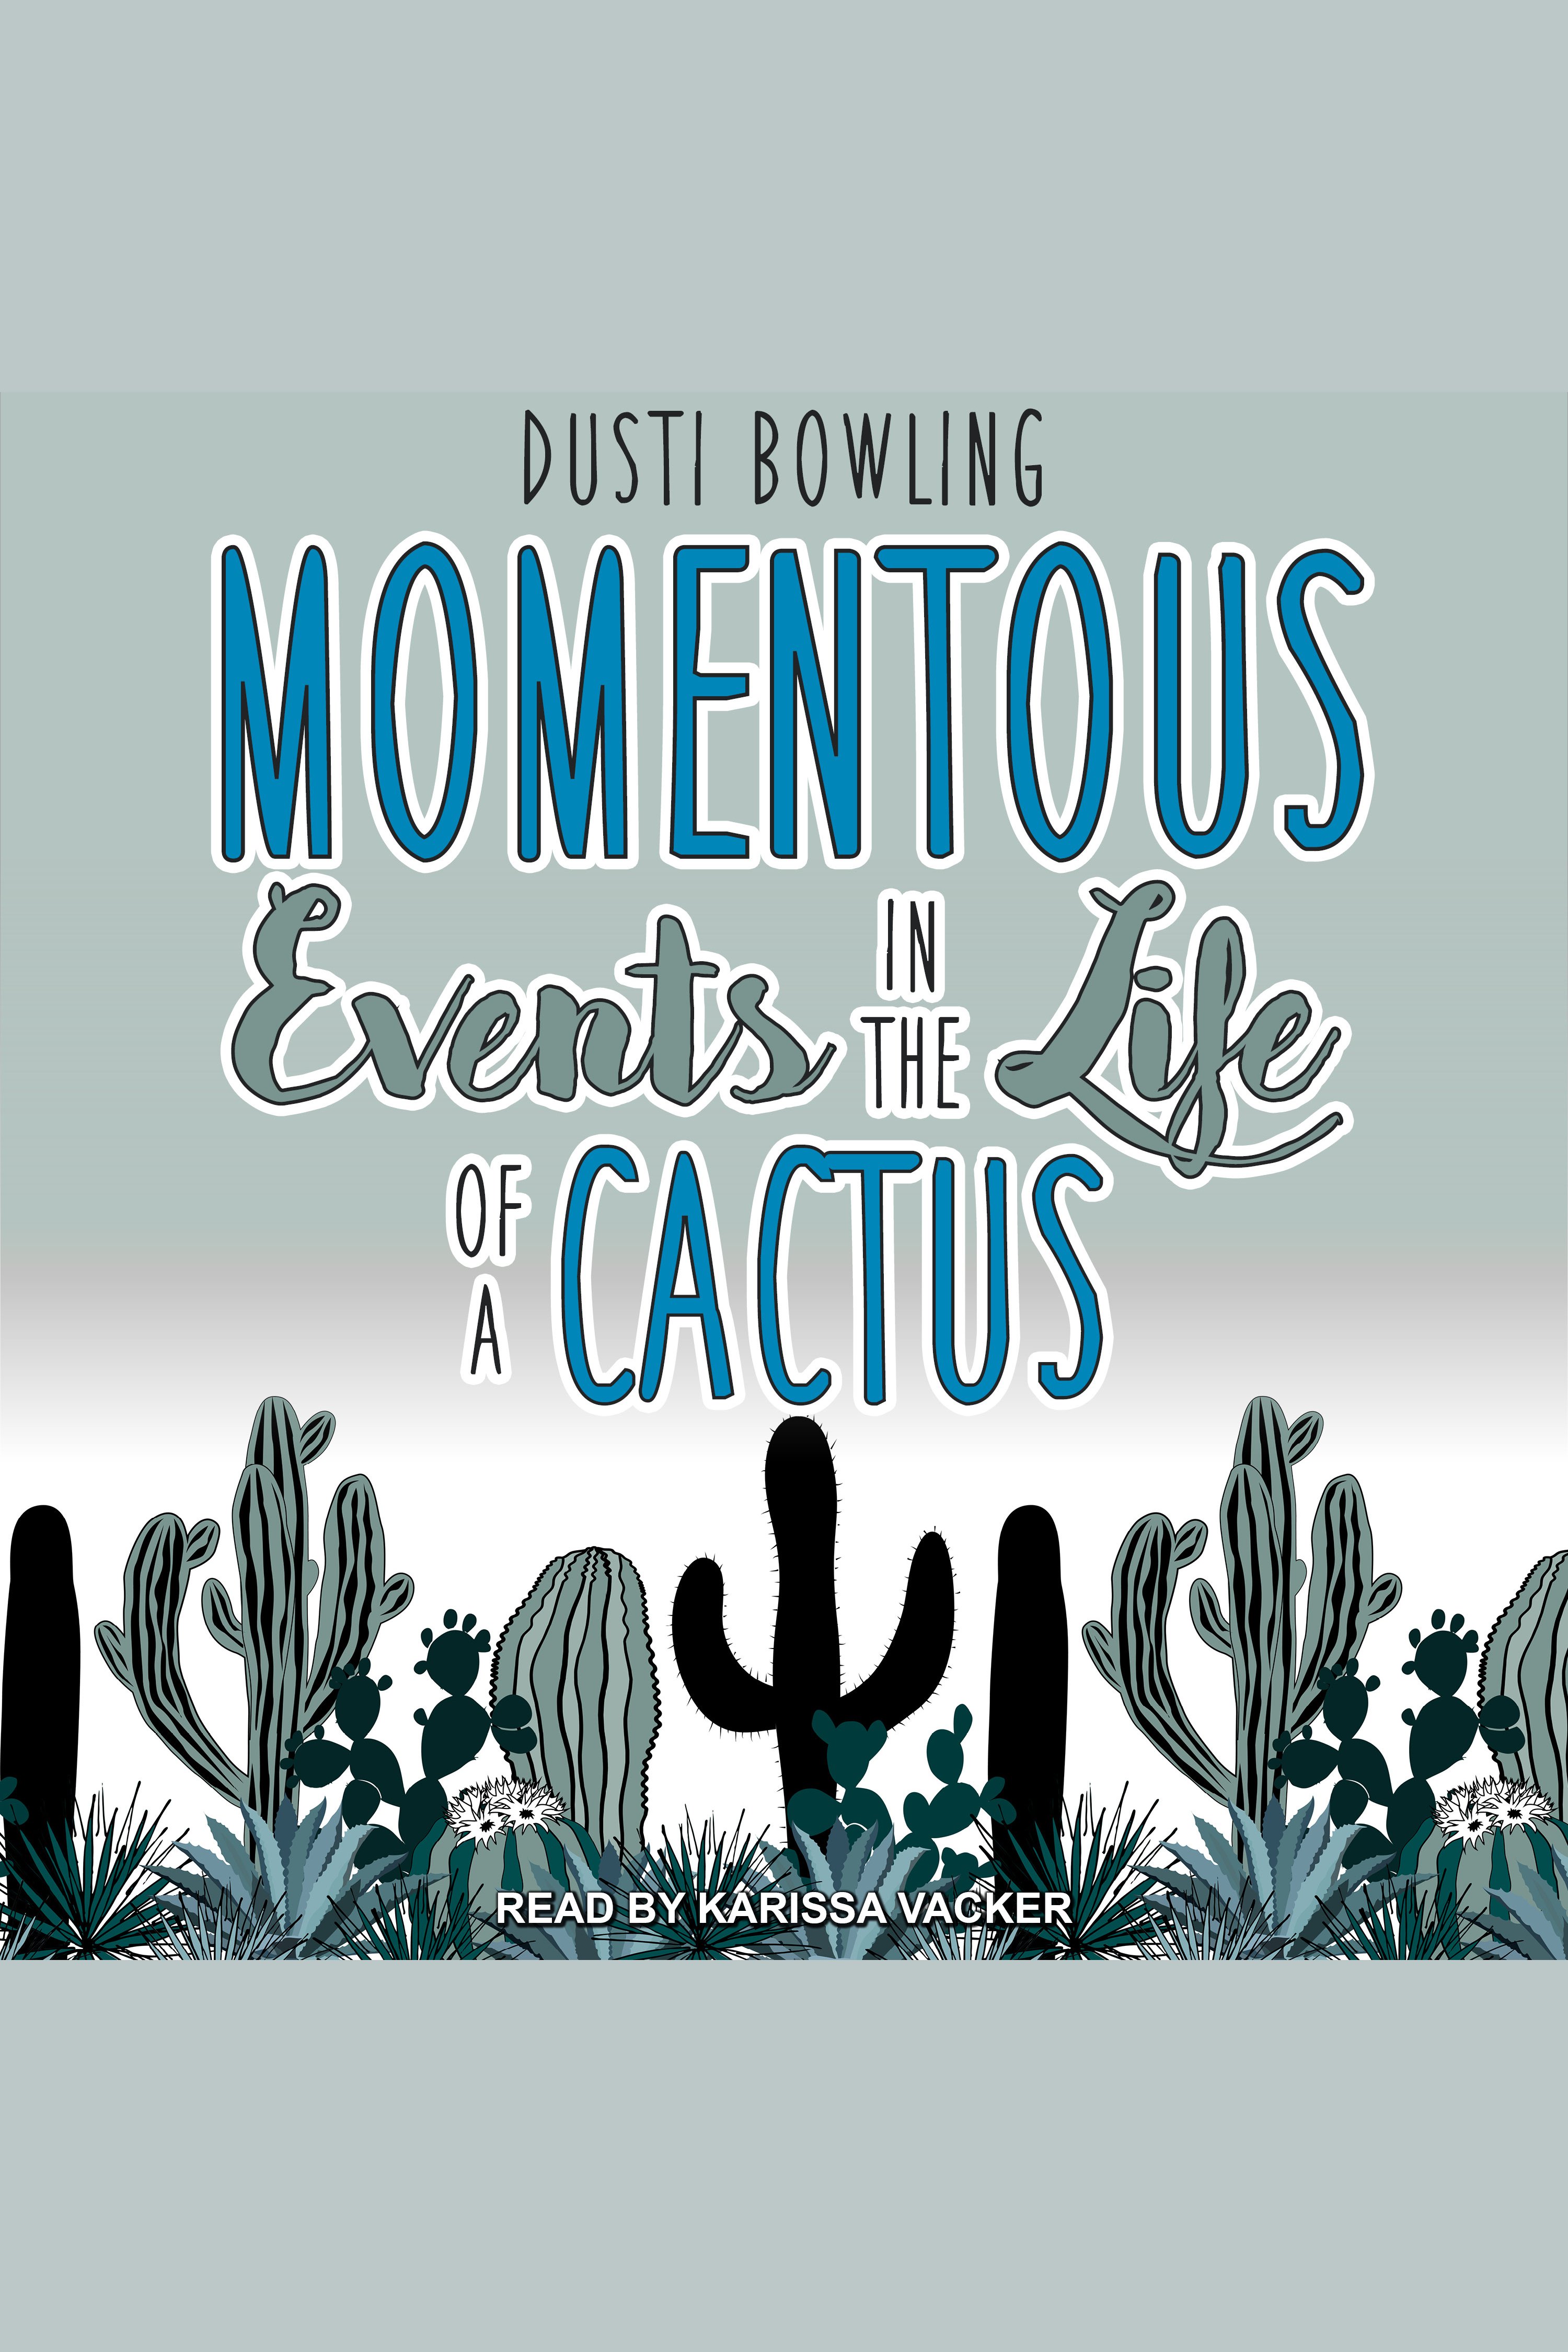 Momentous Events in the Life of a Cactus cover image